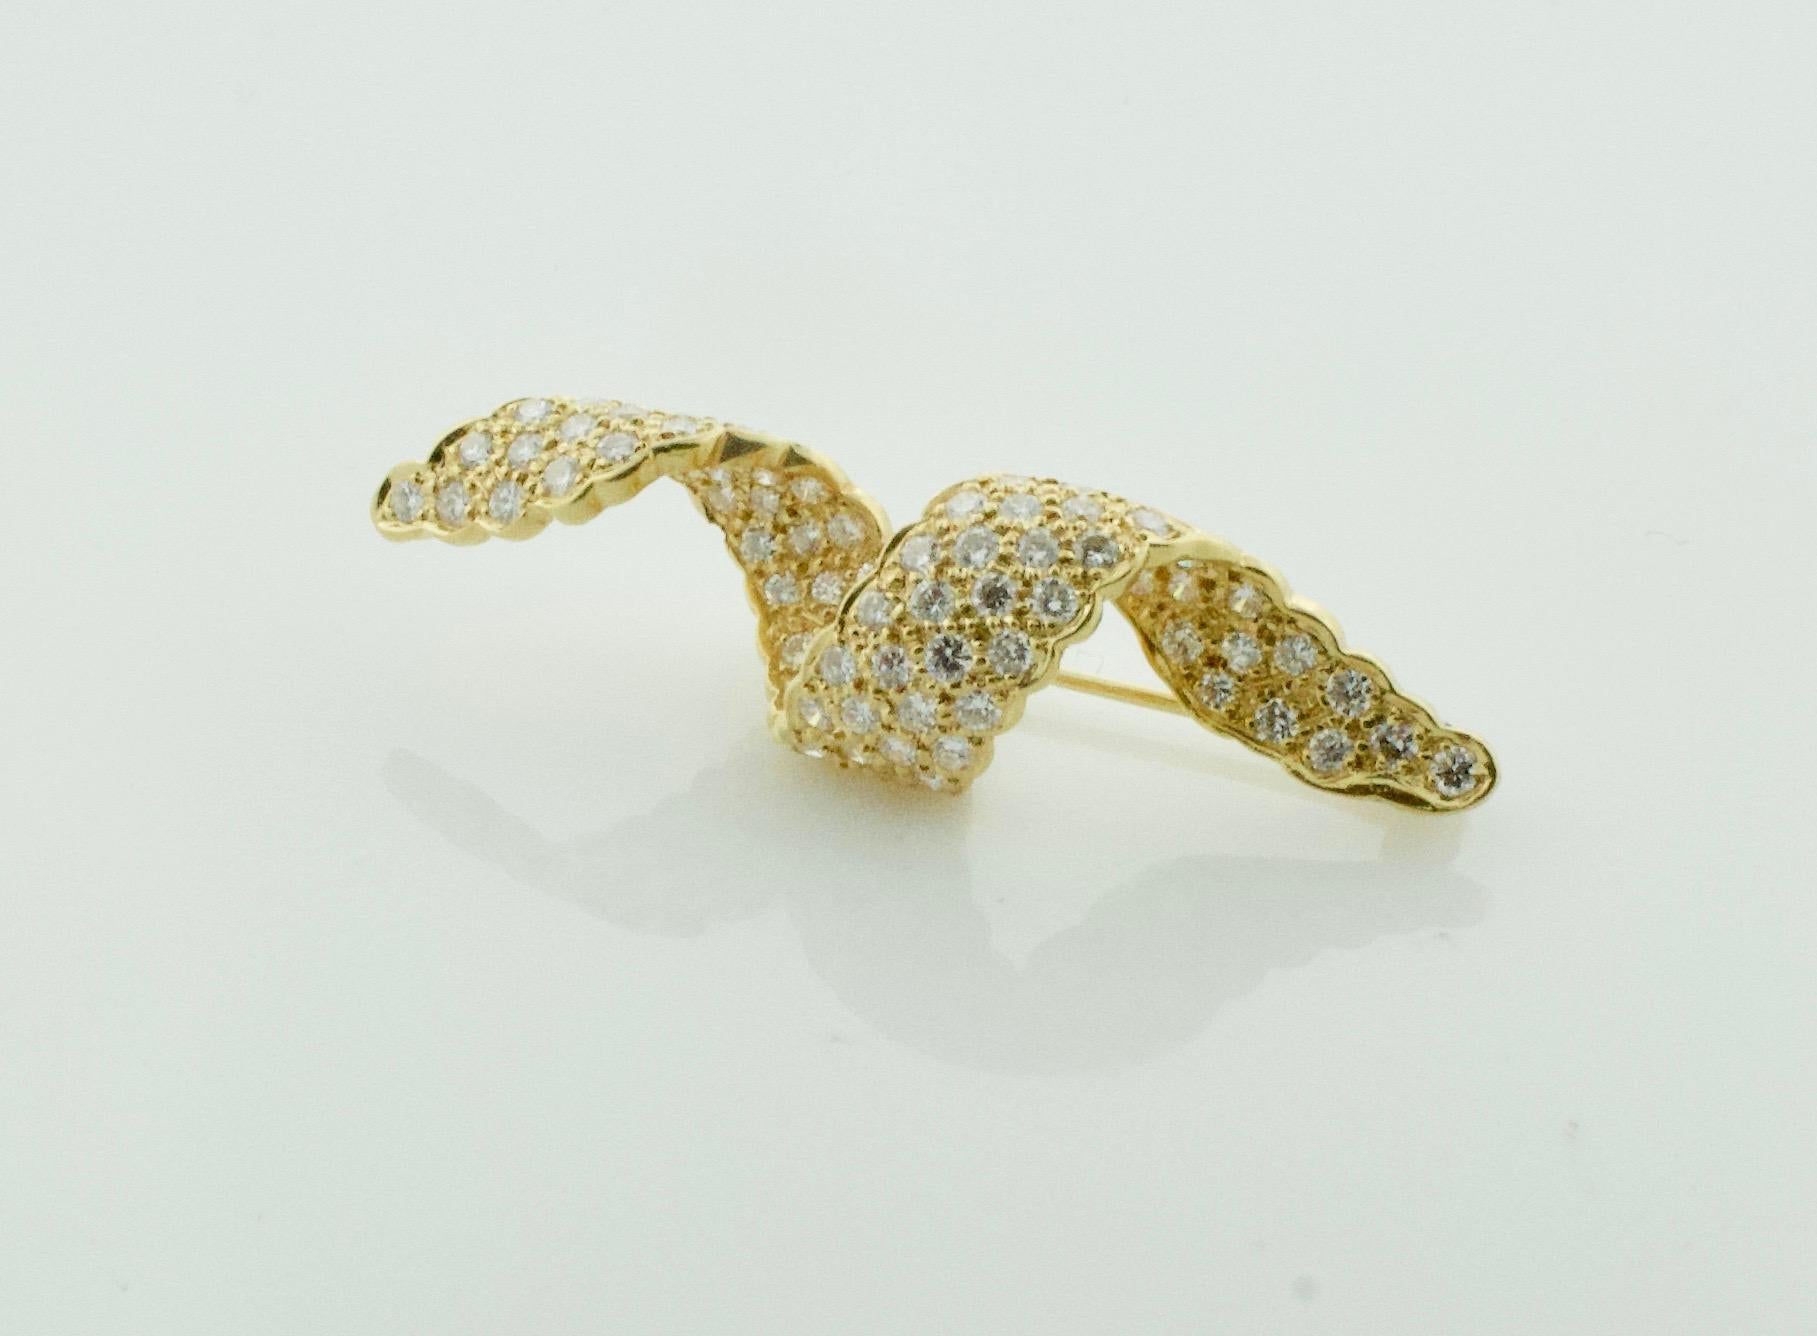 Diamond Swirl Brooch in 18k Yellow Gold 2.05 Carats Circa 1960's
A Lovely Gift 
Eighty Two Round Brilliant Cut Diamonds Weighing 2.05 Carats Approximately [GH VVS]
